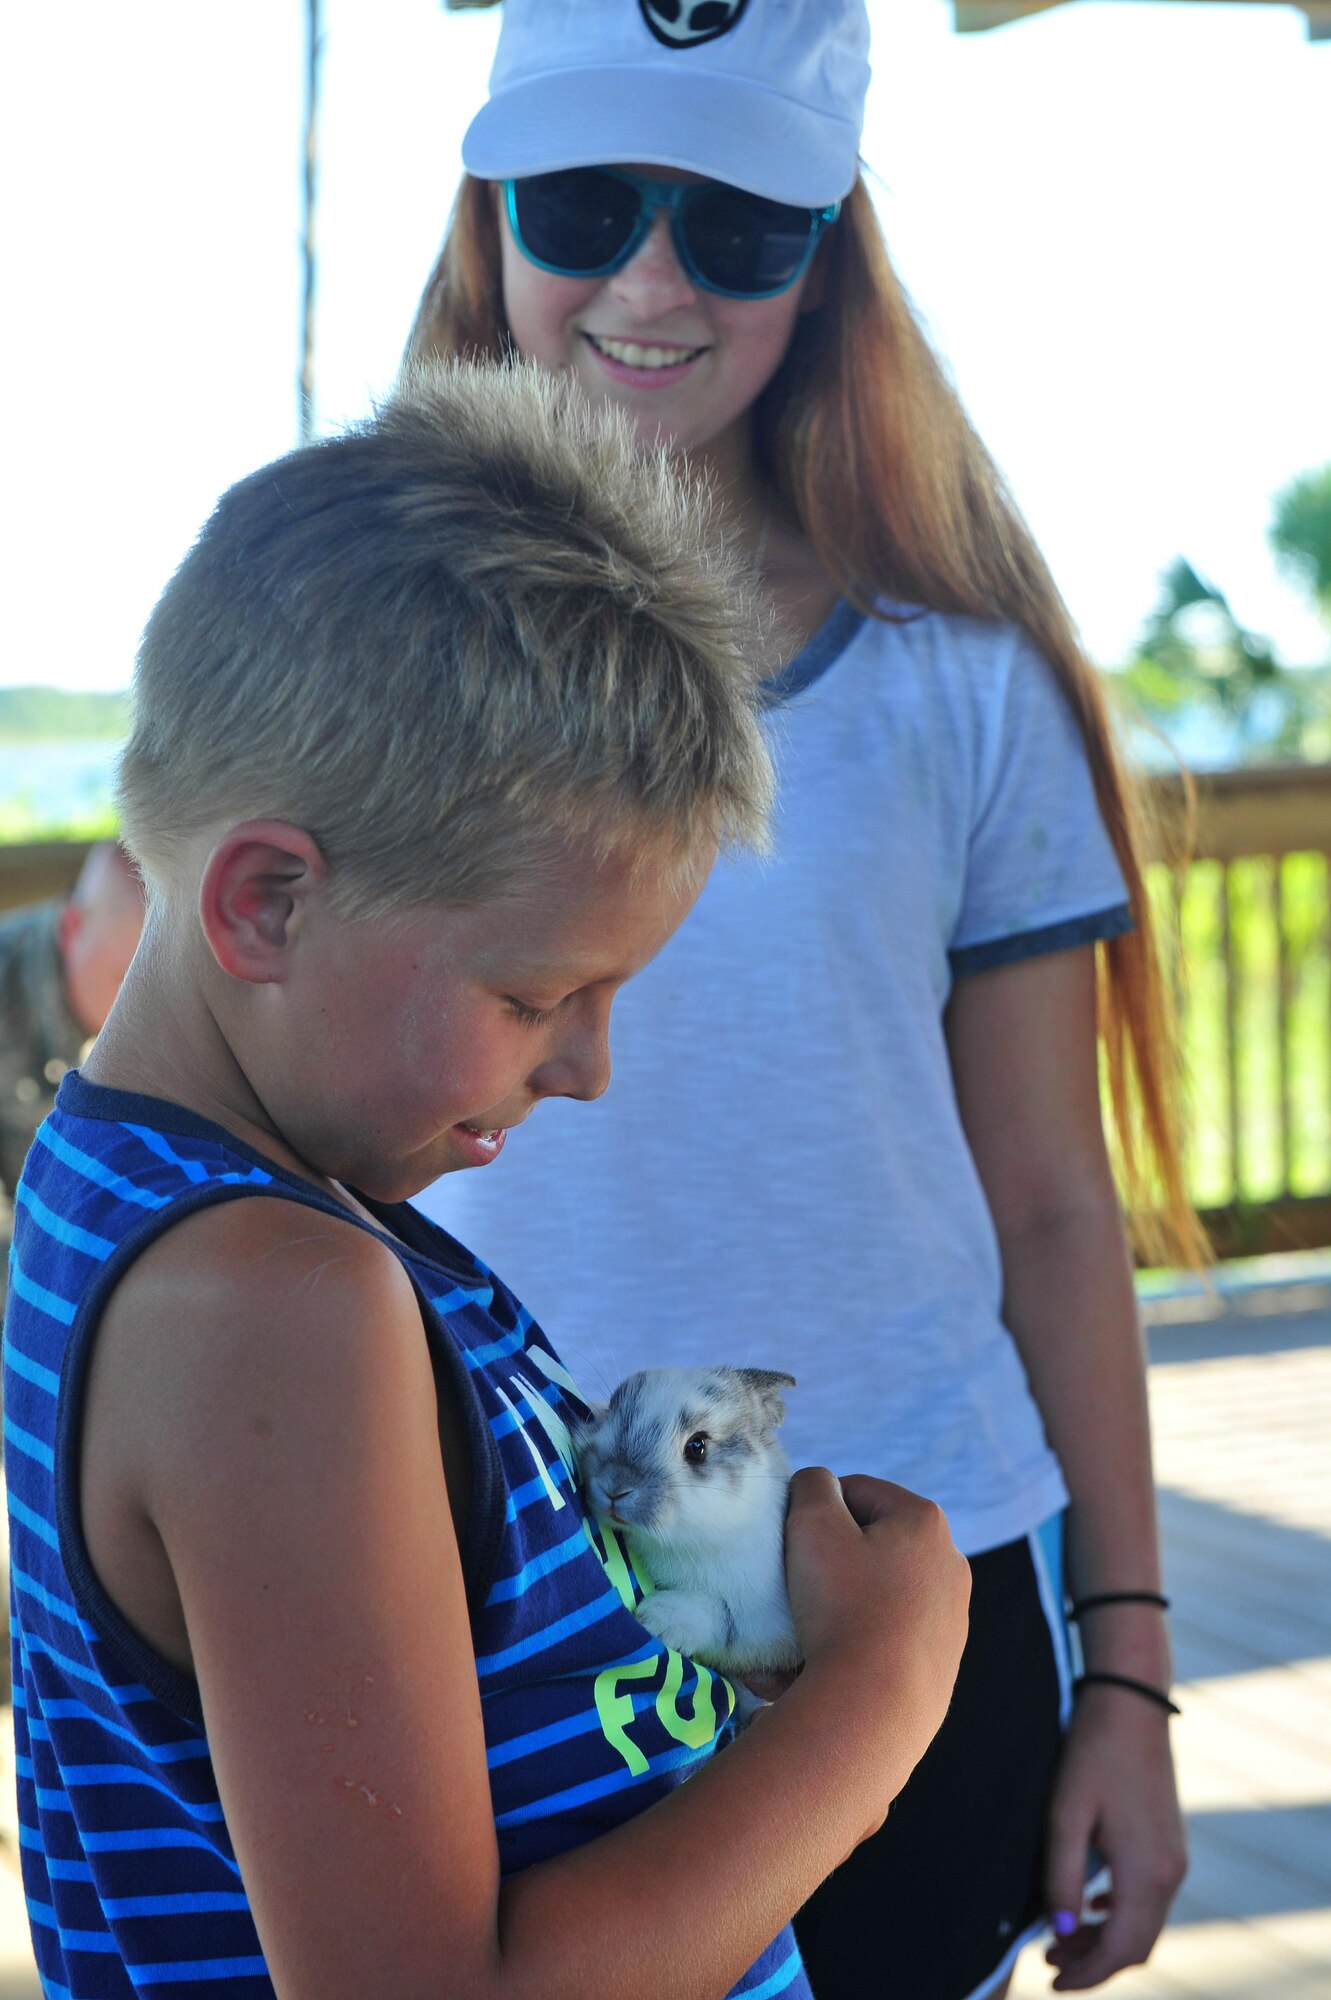 A Hurlburt Field child holds a rabbit during a animal encounter event at the Soundside Marina on Hurlburt Field, Fla., June 23, 2016. The animal introdctions were part of a Key Spouse and Deployed Family Barbeque, one of several events hosted by the Airmen and Family Readiness Center to help familes of deployed Airmen develope and strengthen their support network. (U.S. Air Force photo by Staff Sgt. Kentavist P. Brackin)